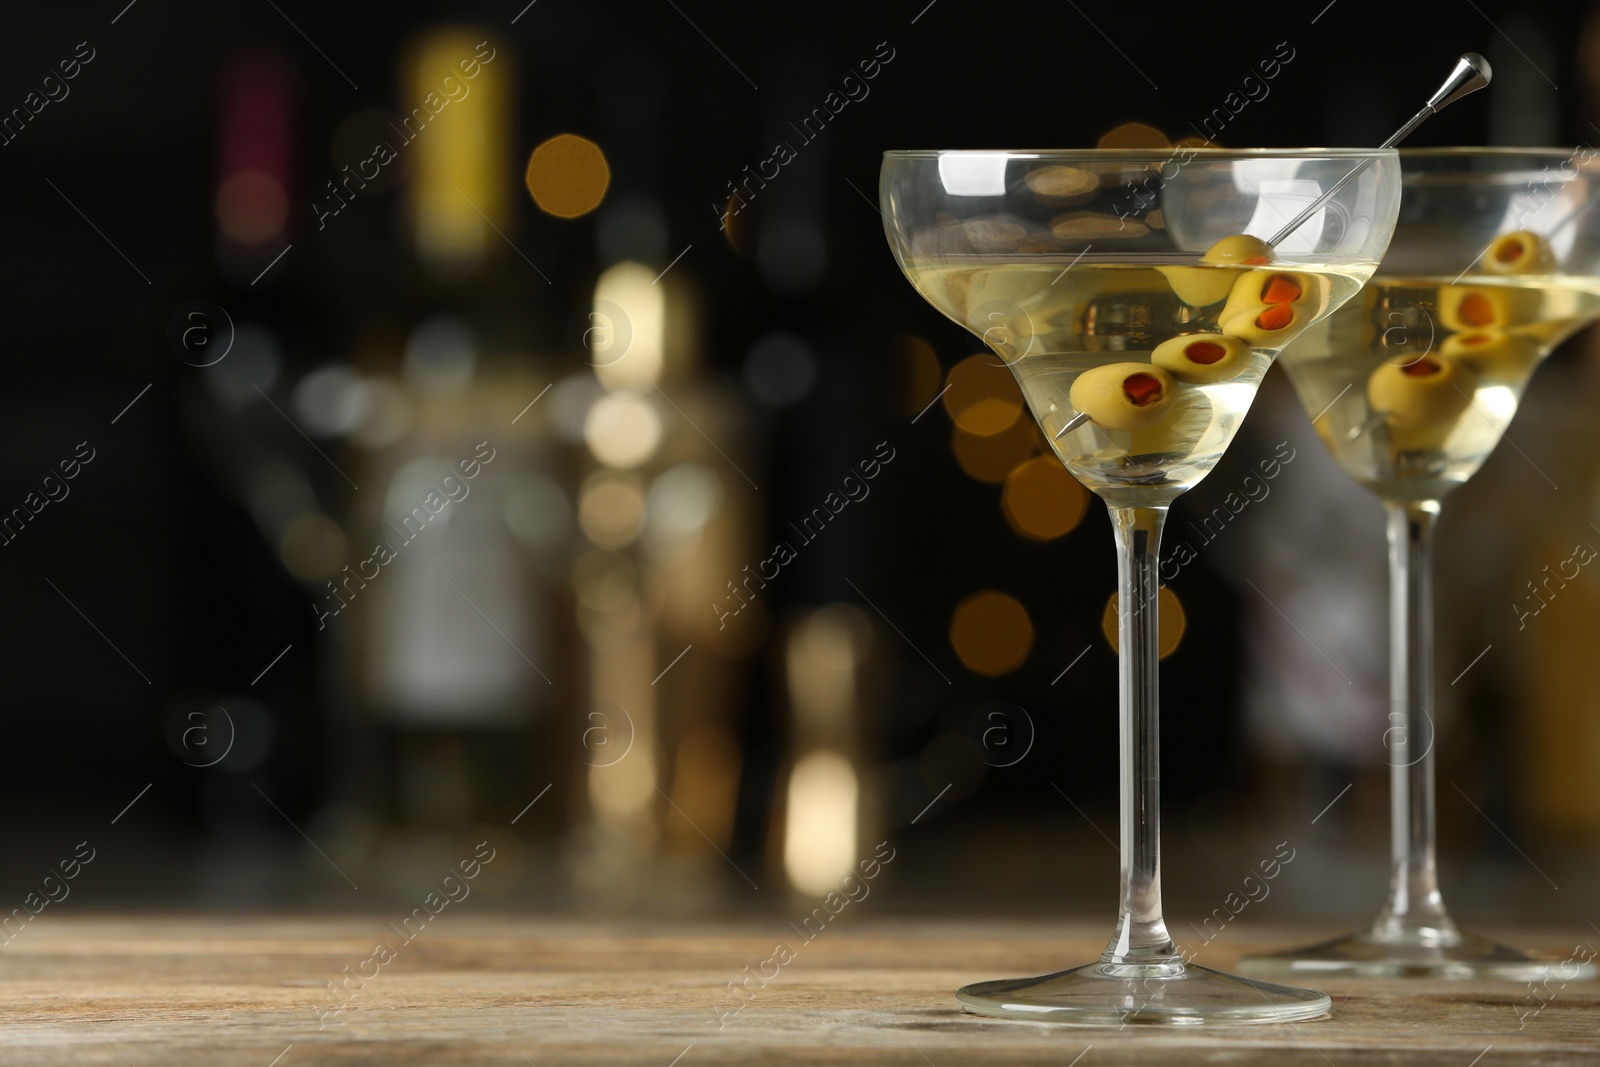 Photo of Glasses of Classic Dry Martini with olives on wooden table against blurred background. Space for text